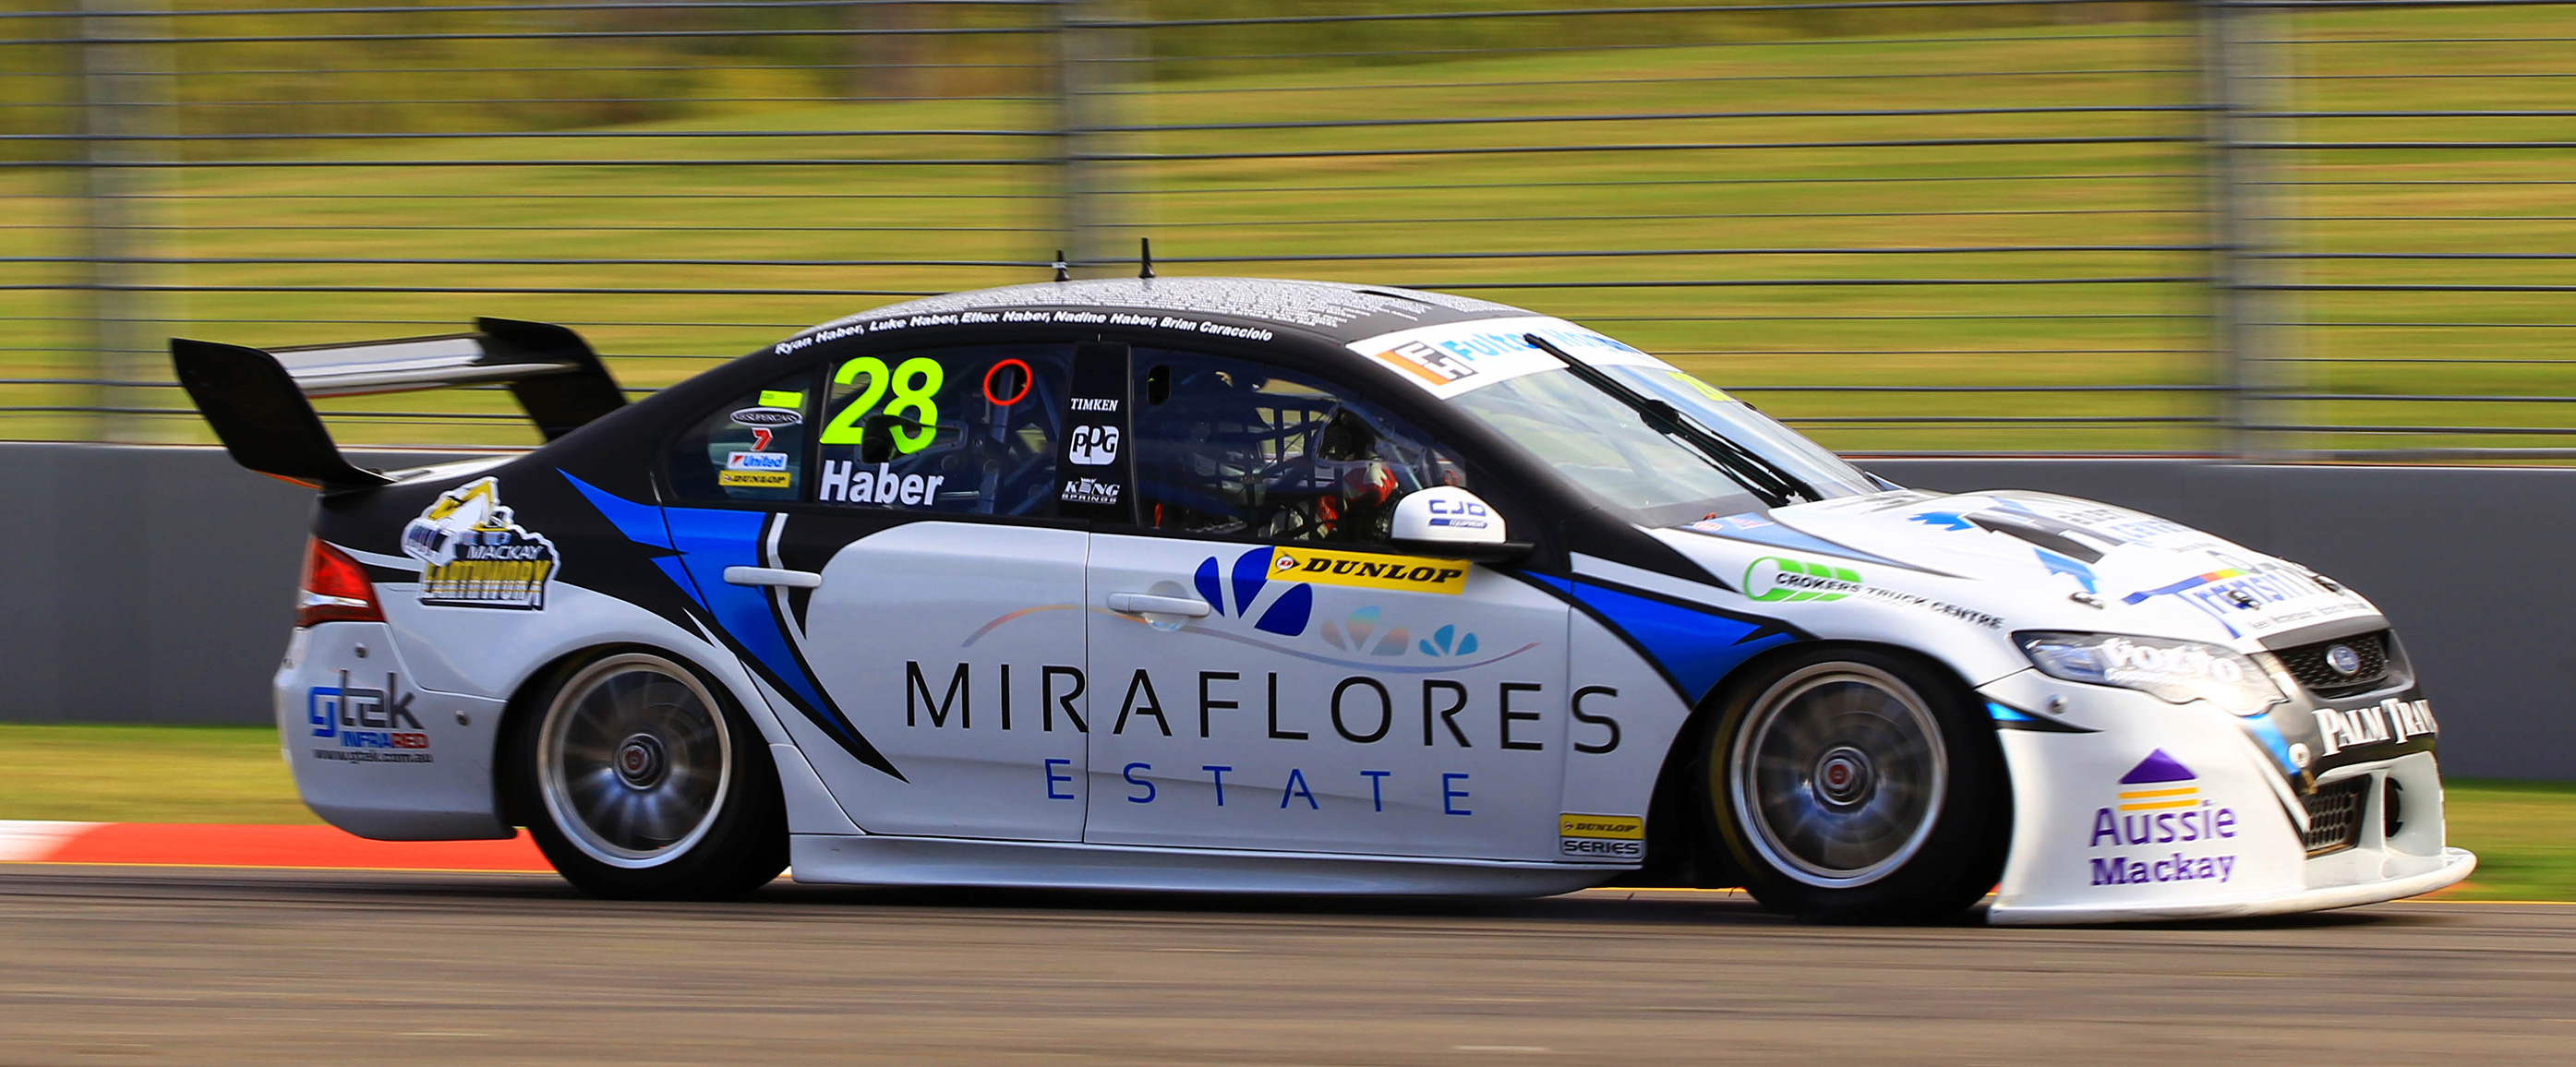 HABER HUMBLED BY V8 SUPERCAR SUPPORT